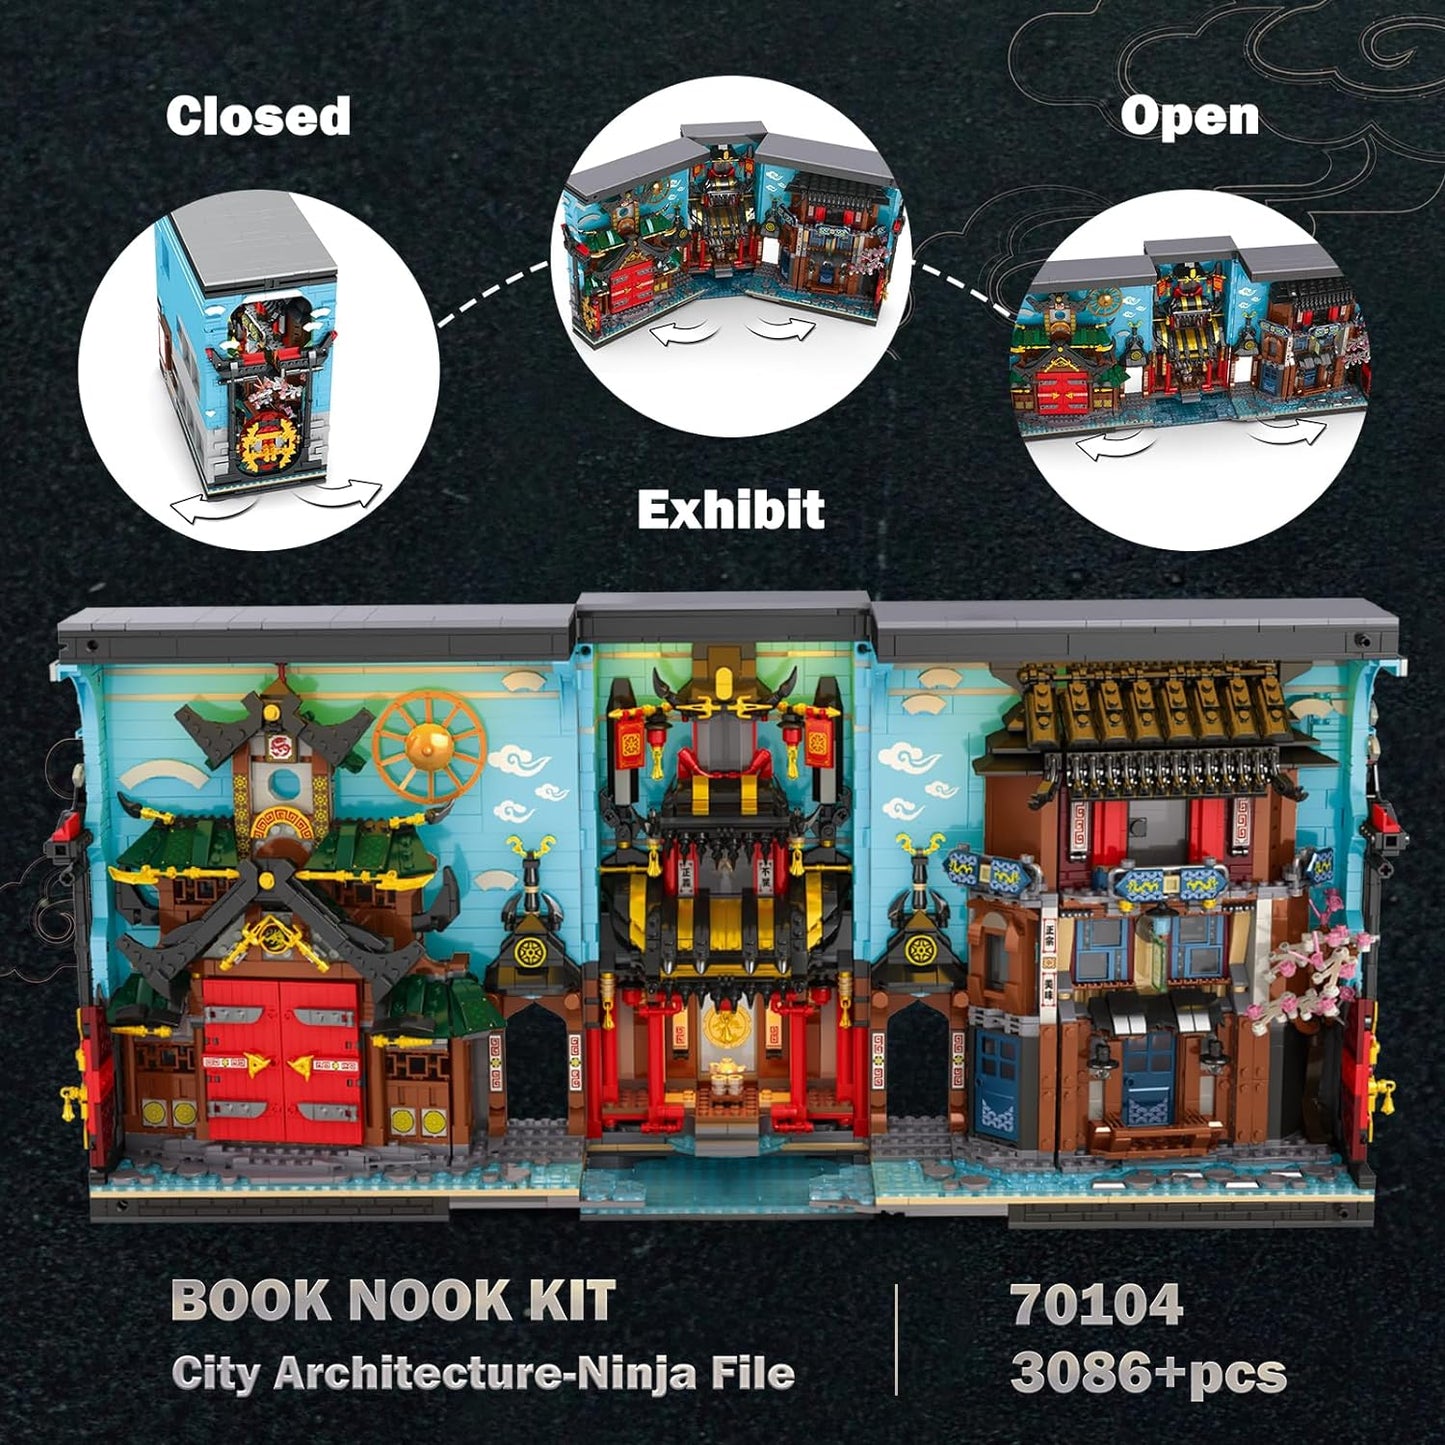 JMBricklayer Ninja Building Set for Adults 70104, Book Nook Kit with LED Light, Creative Decorative Bookcase Book Stand Building Kit, Collectible and Display Model Toys Gifts for Kids Adult